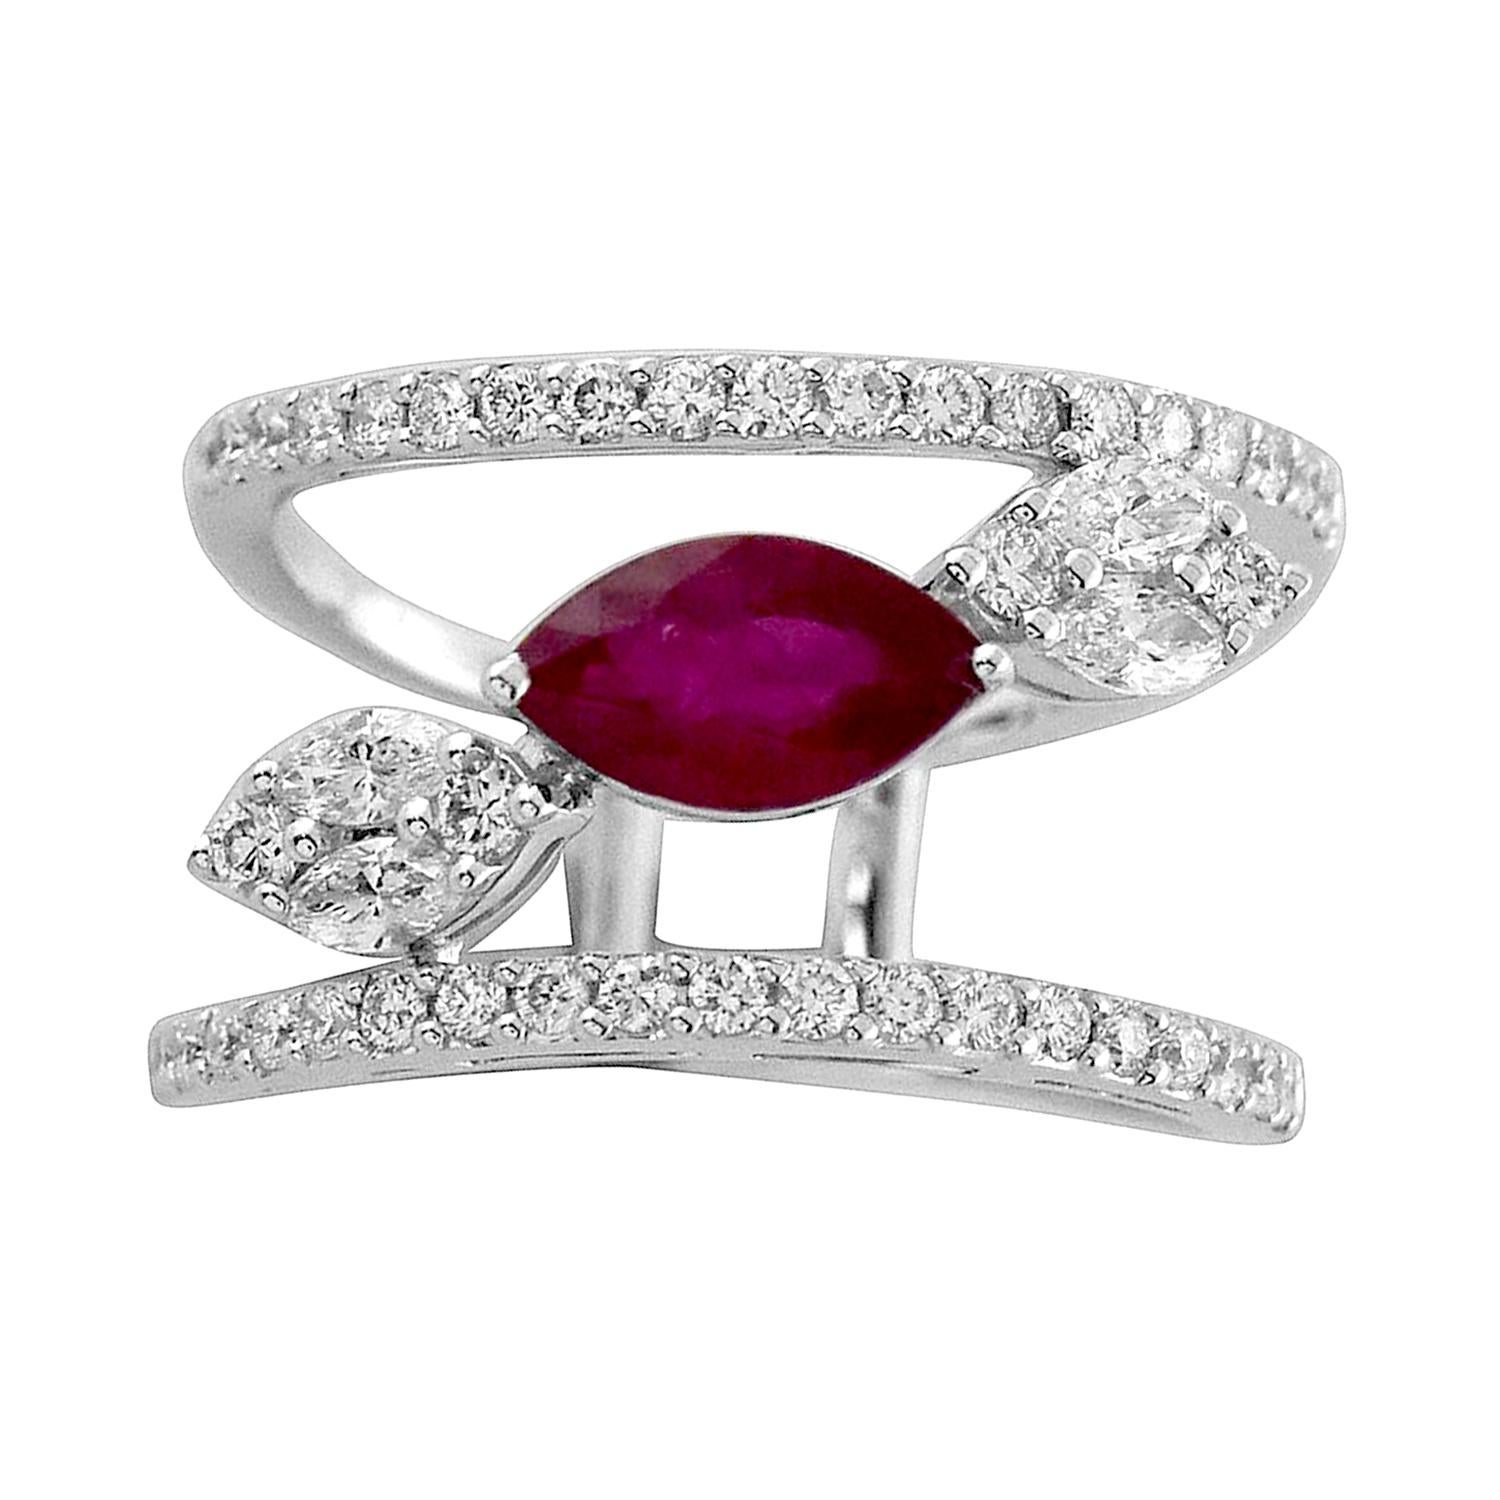 Mixed Cut 1.03 Ct Marquise Shaped Ruby Wide Ring With Diamonds Made In 18k White Gold For Sale